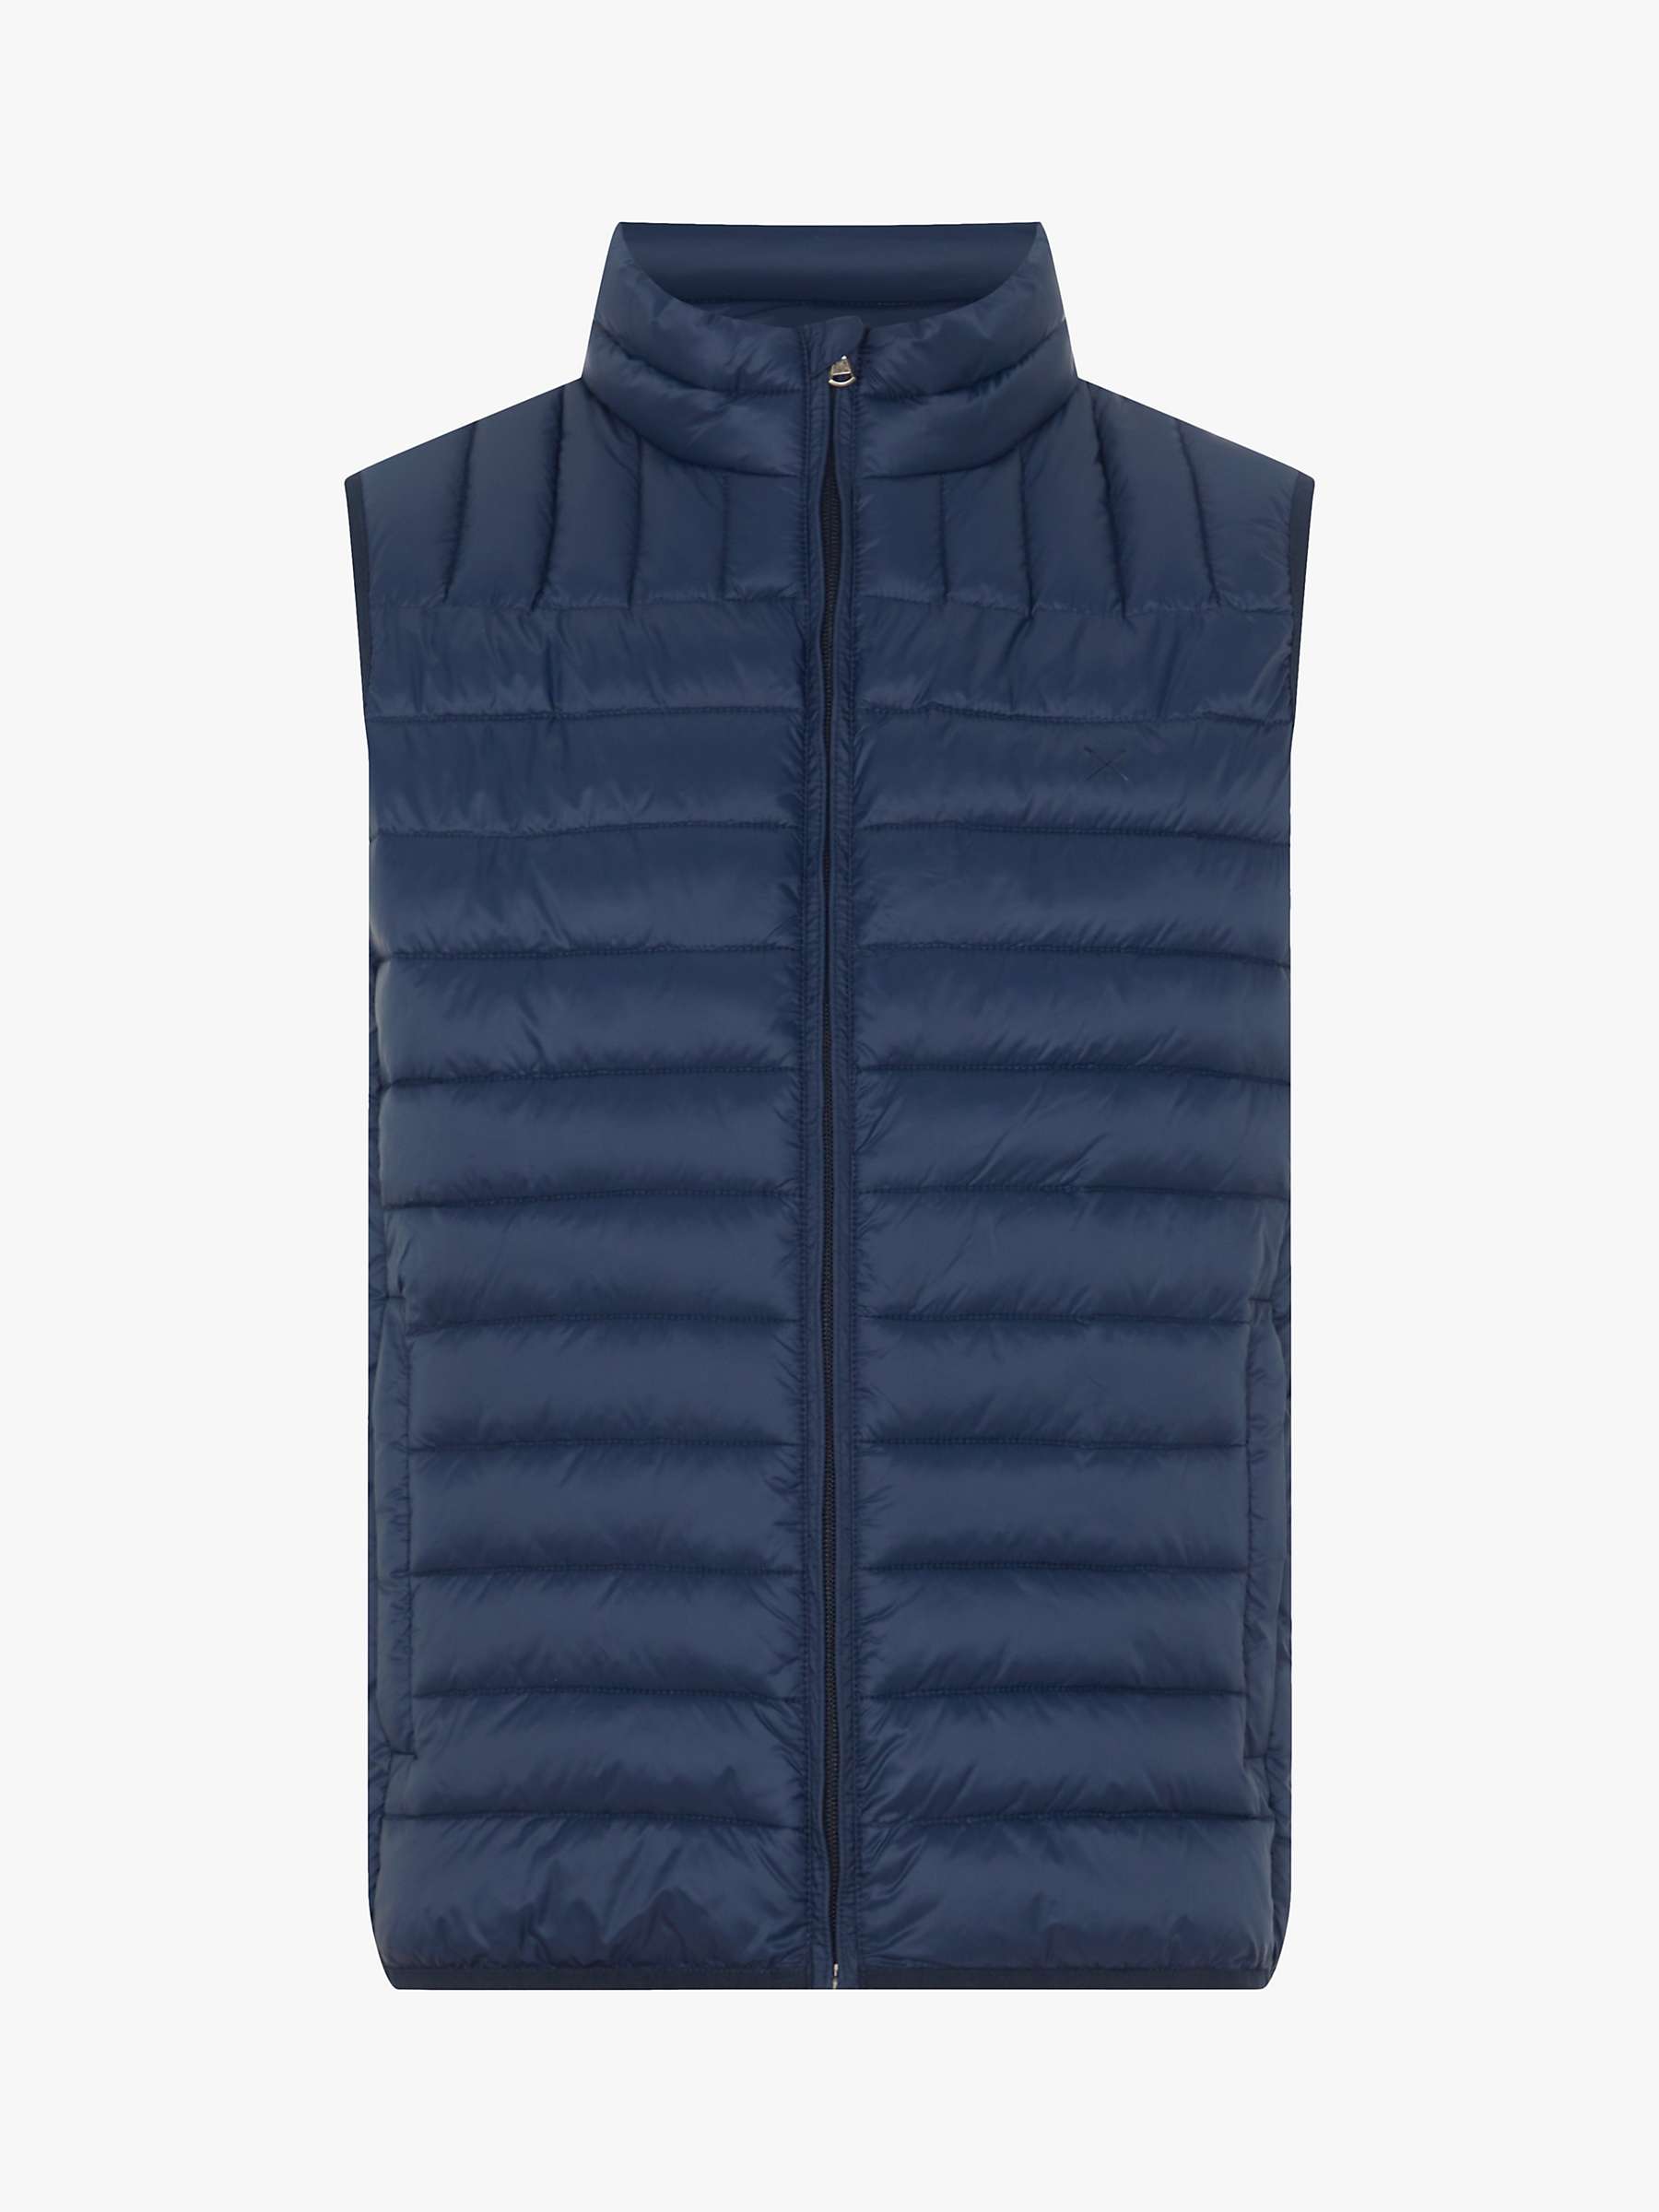 Blue Crew Lightweight Lowther Gilet in Navy Blue Mens Clothing Jackets Waistcoats and gilets for Men 